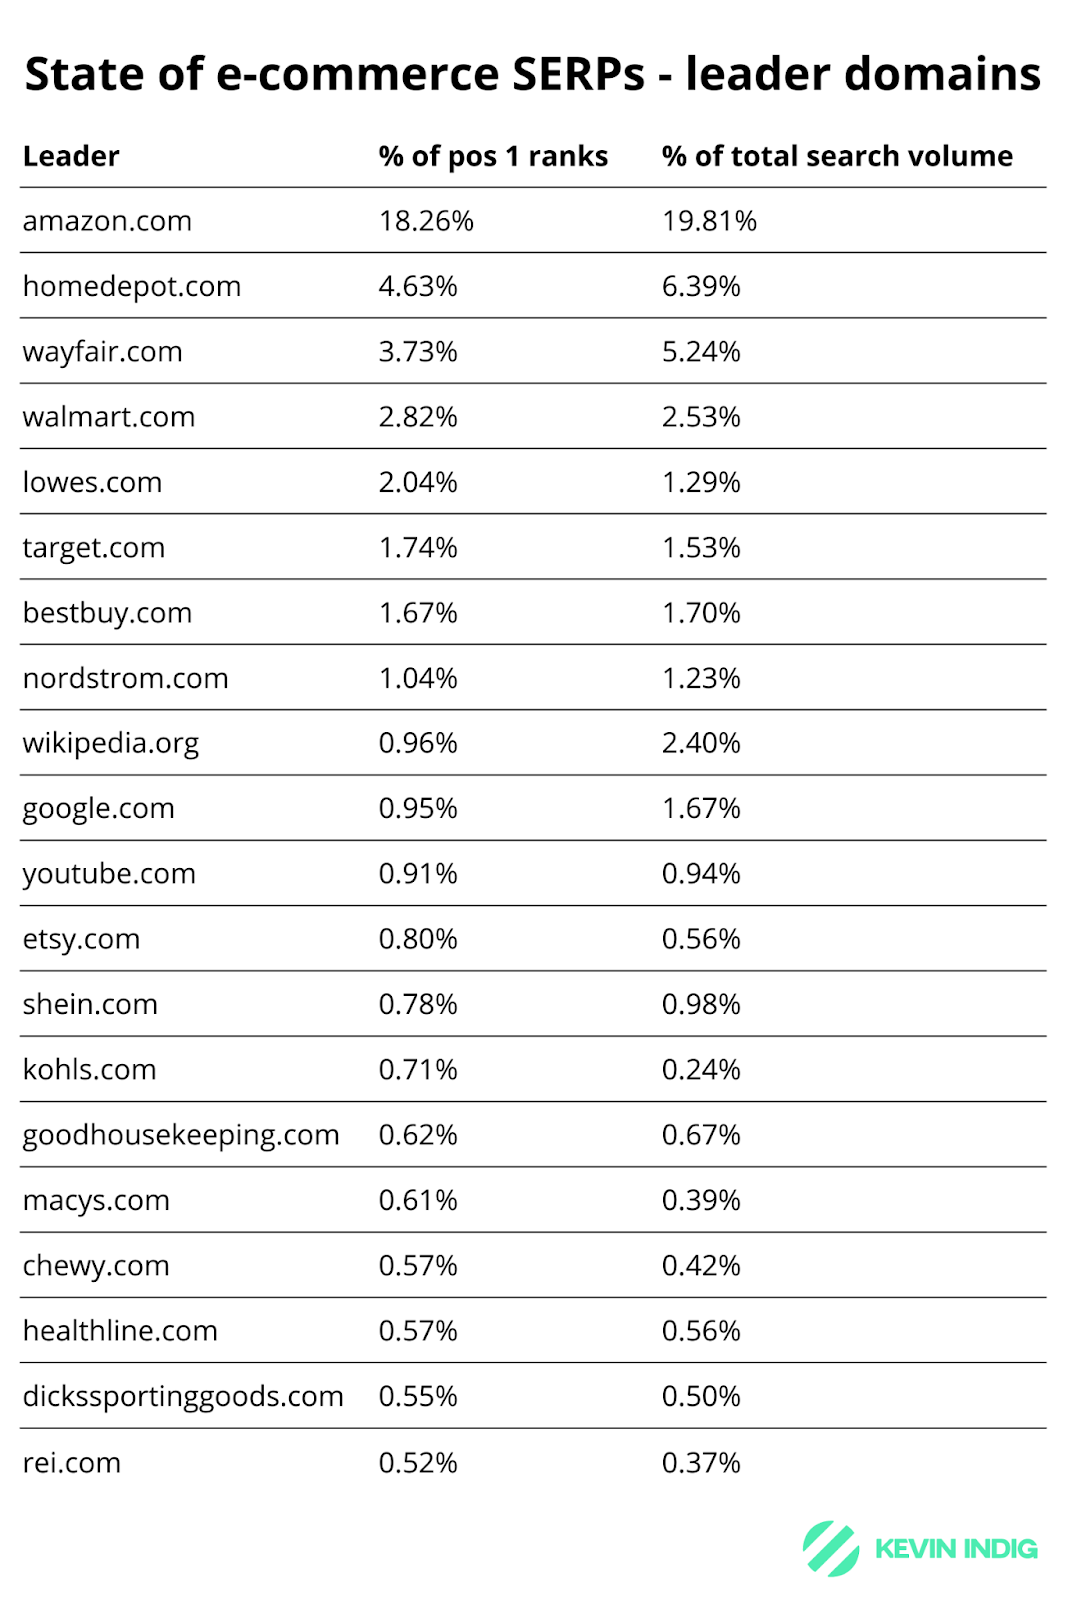 The top 20 domains by position 1 ranks for 20K e-commerce keywords